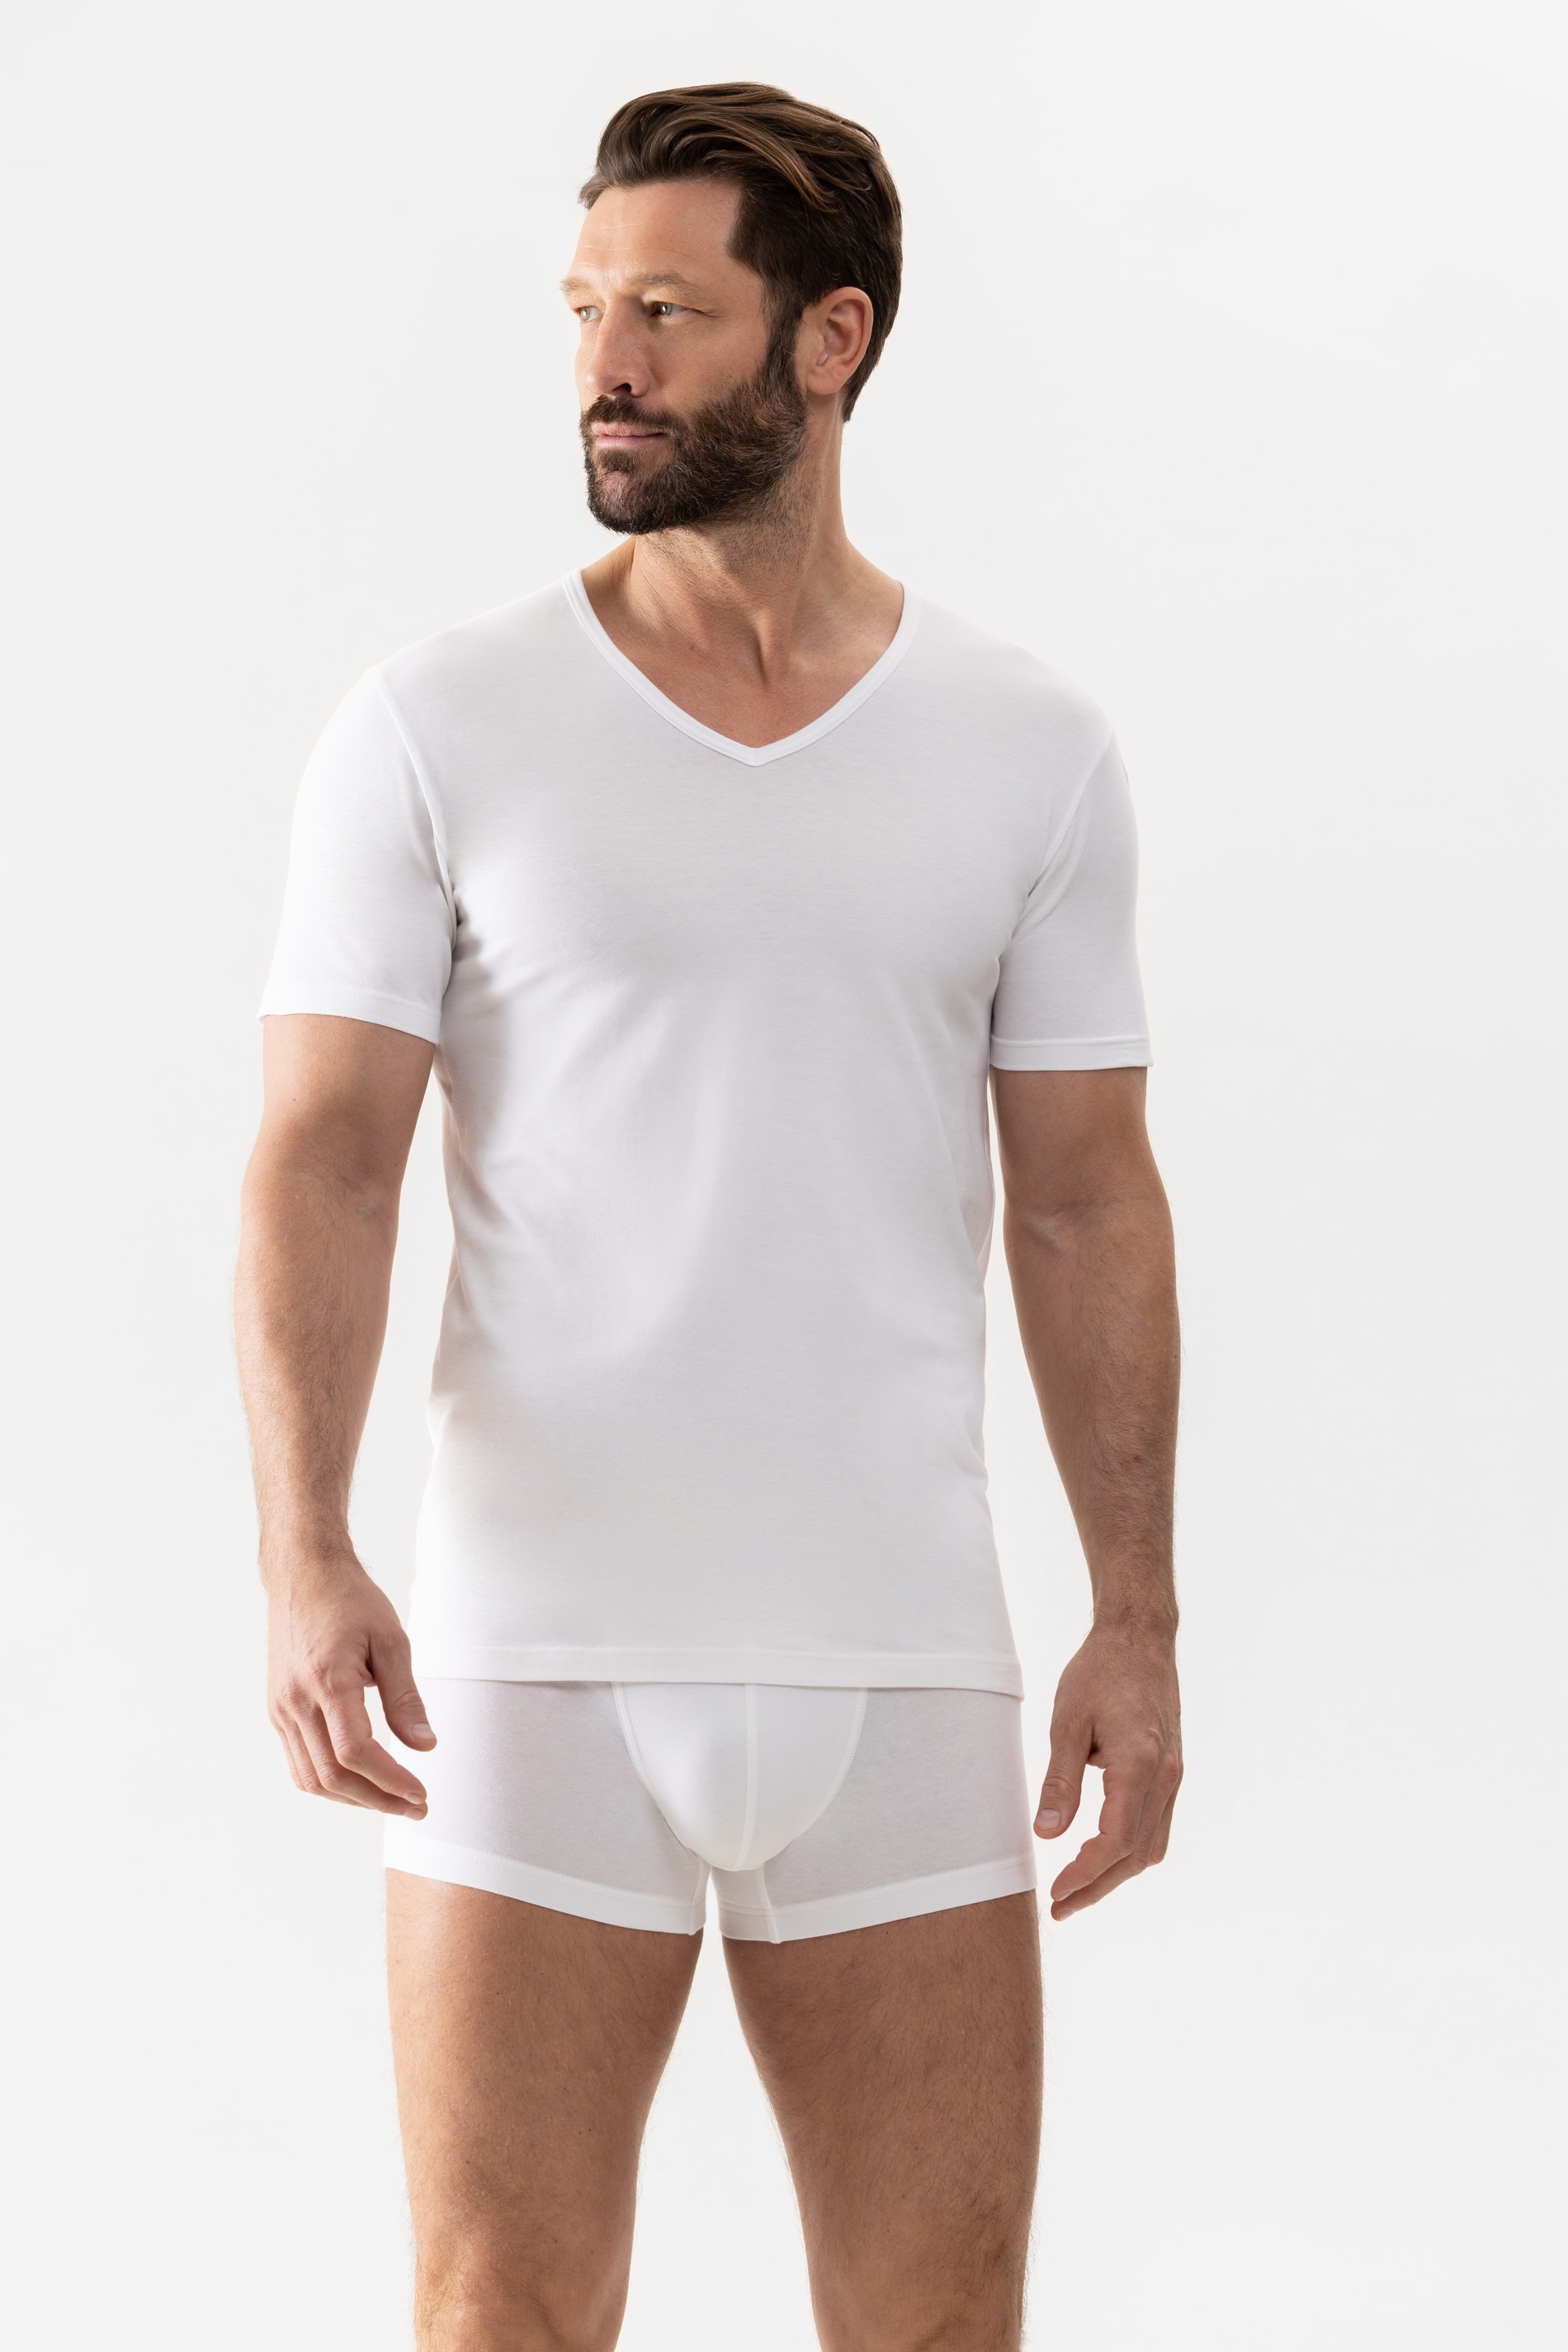 V-Neck Weiss RE:THINK Frontansicht | mey®